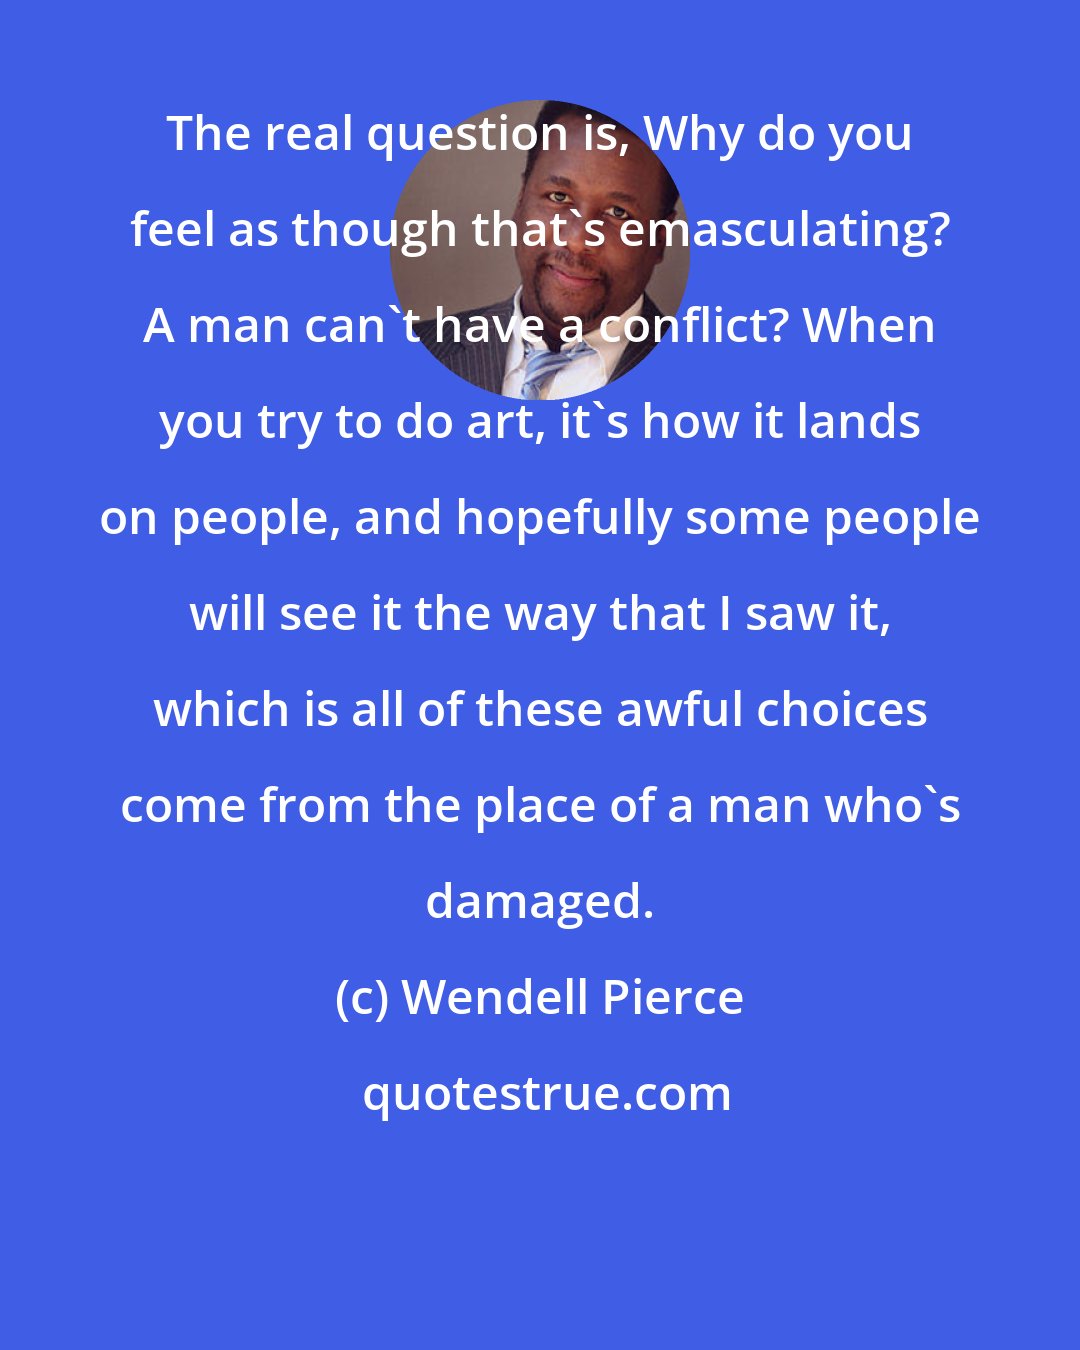 Wendell Pierce: The real question is, Why do you feel as though that's emasculating? A man can't have a conflict? When you try to do art, it's how it lands on people, and hopefully some people will see it the way that I saw it, which is all of these awful choices come from the place of a man who's damaged.